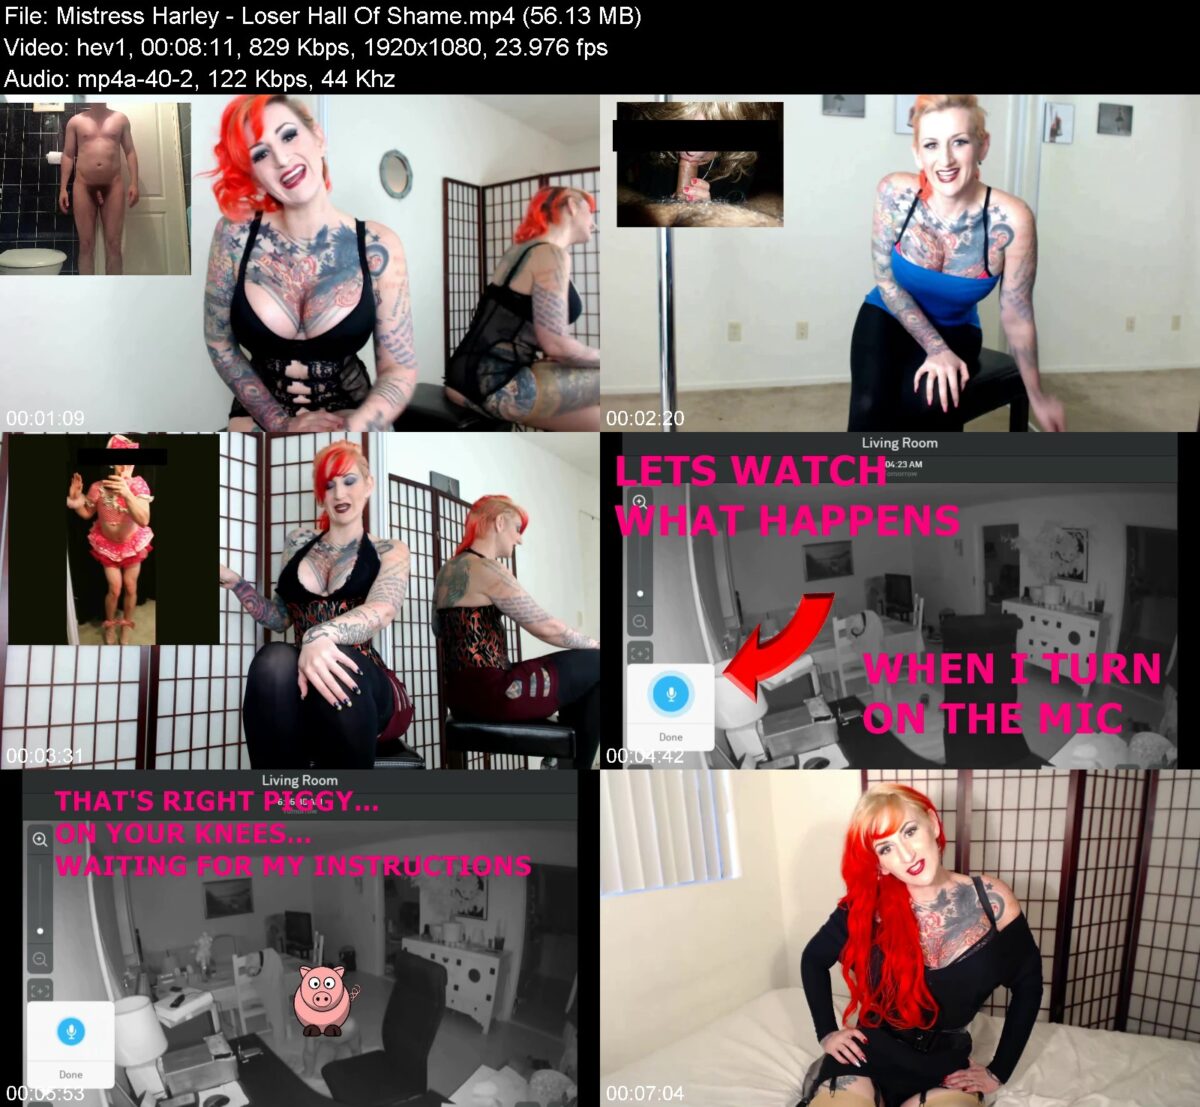 Actress: Mistress Harley. Title and Studio: Loser Hall Of Shame